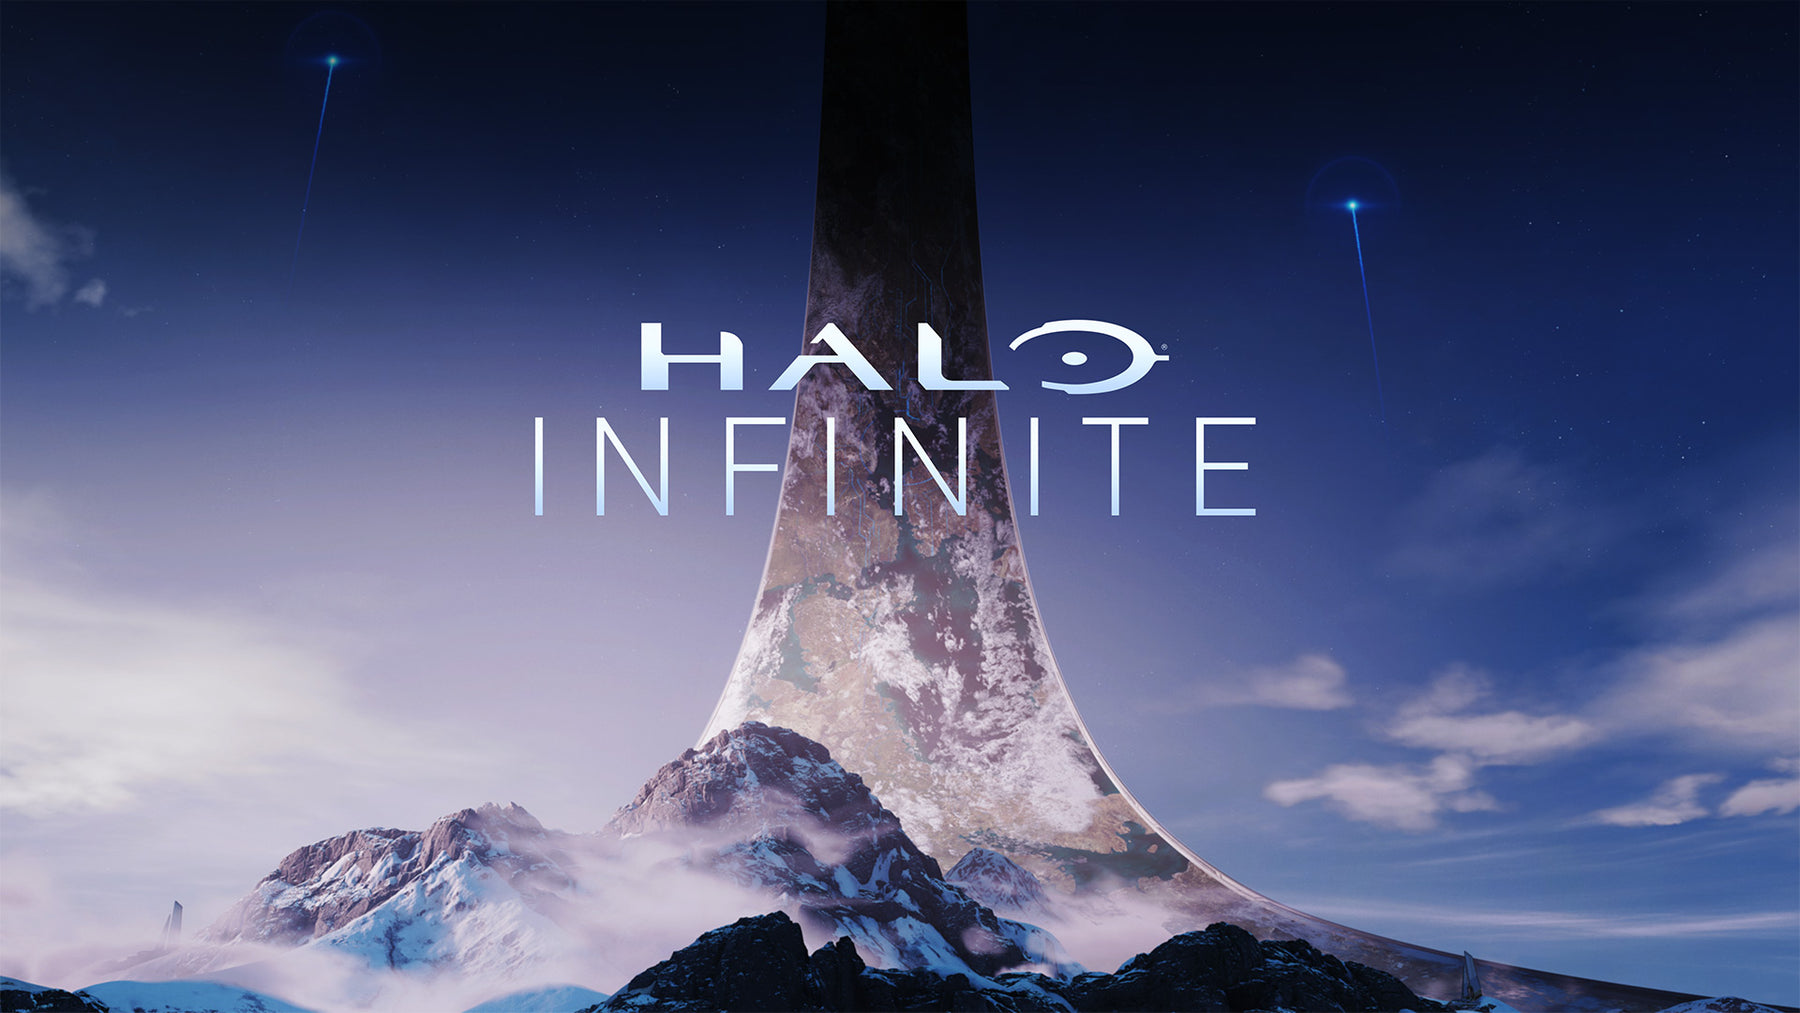 "Halo Infinite" : CLASSIC CHIEF IS BACK!!﻿